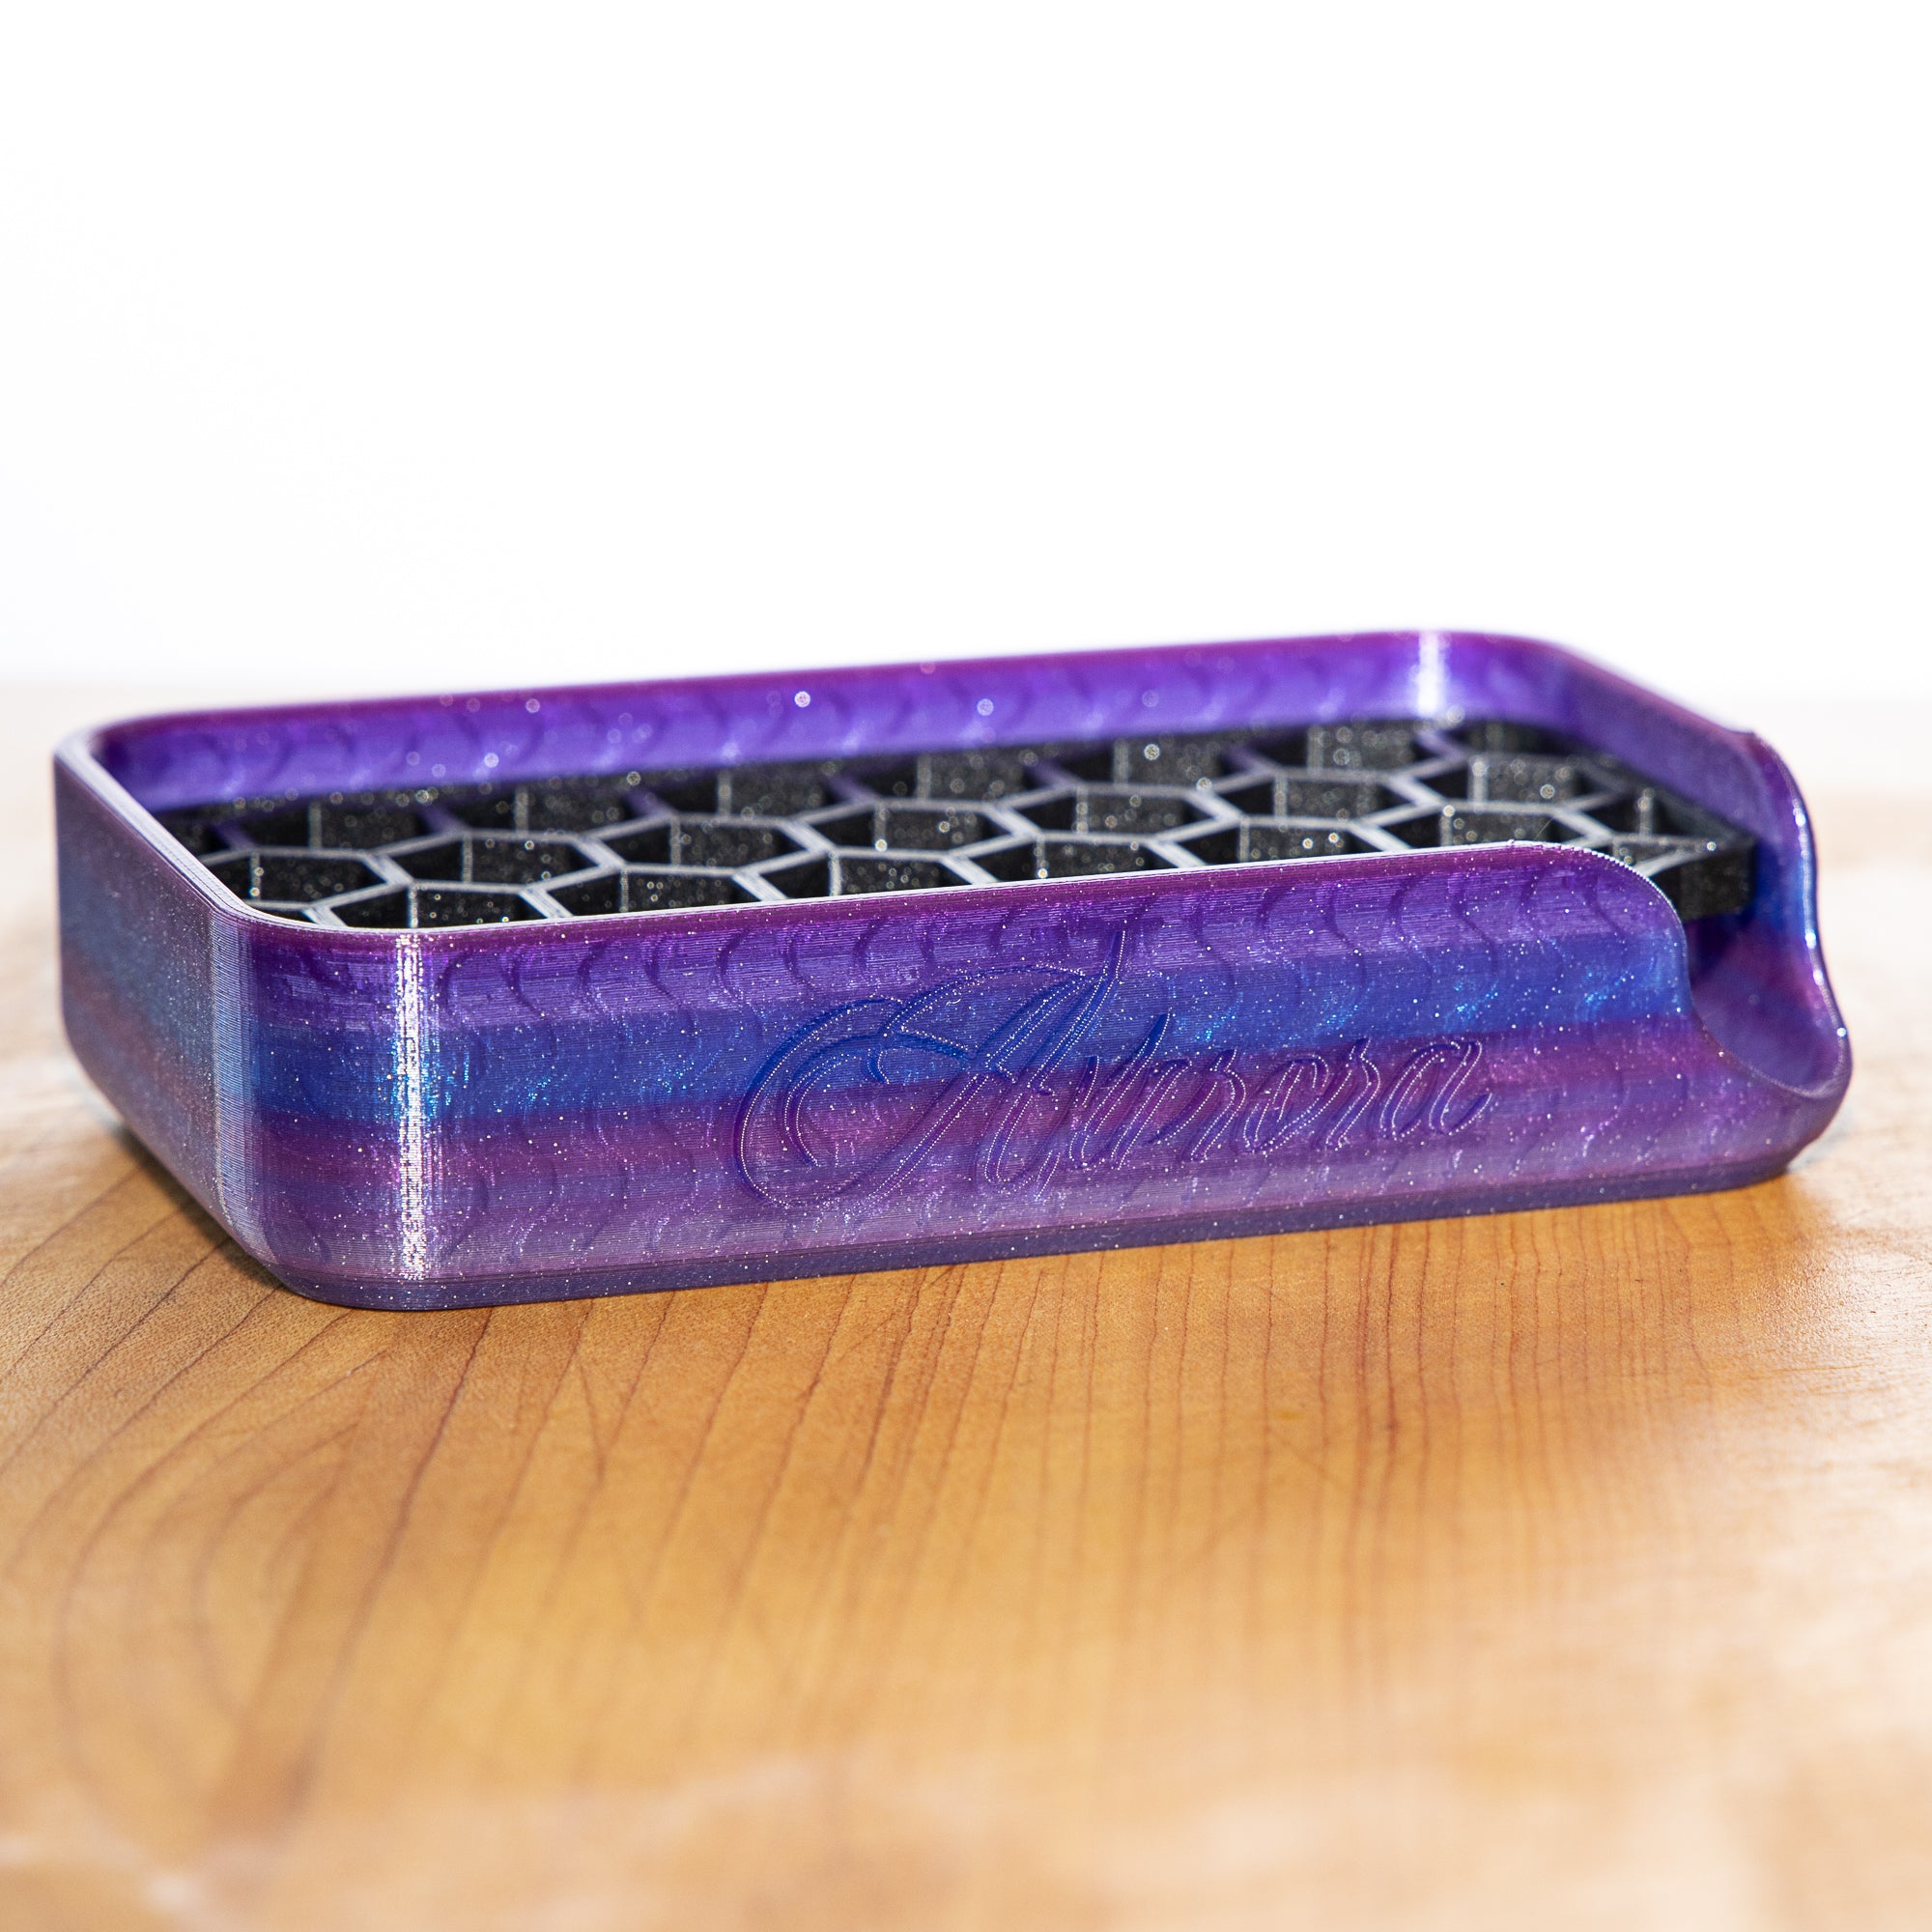 Soap Dish, 3D Printed - Multiple Colors Available